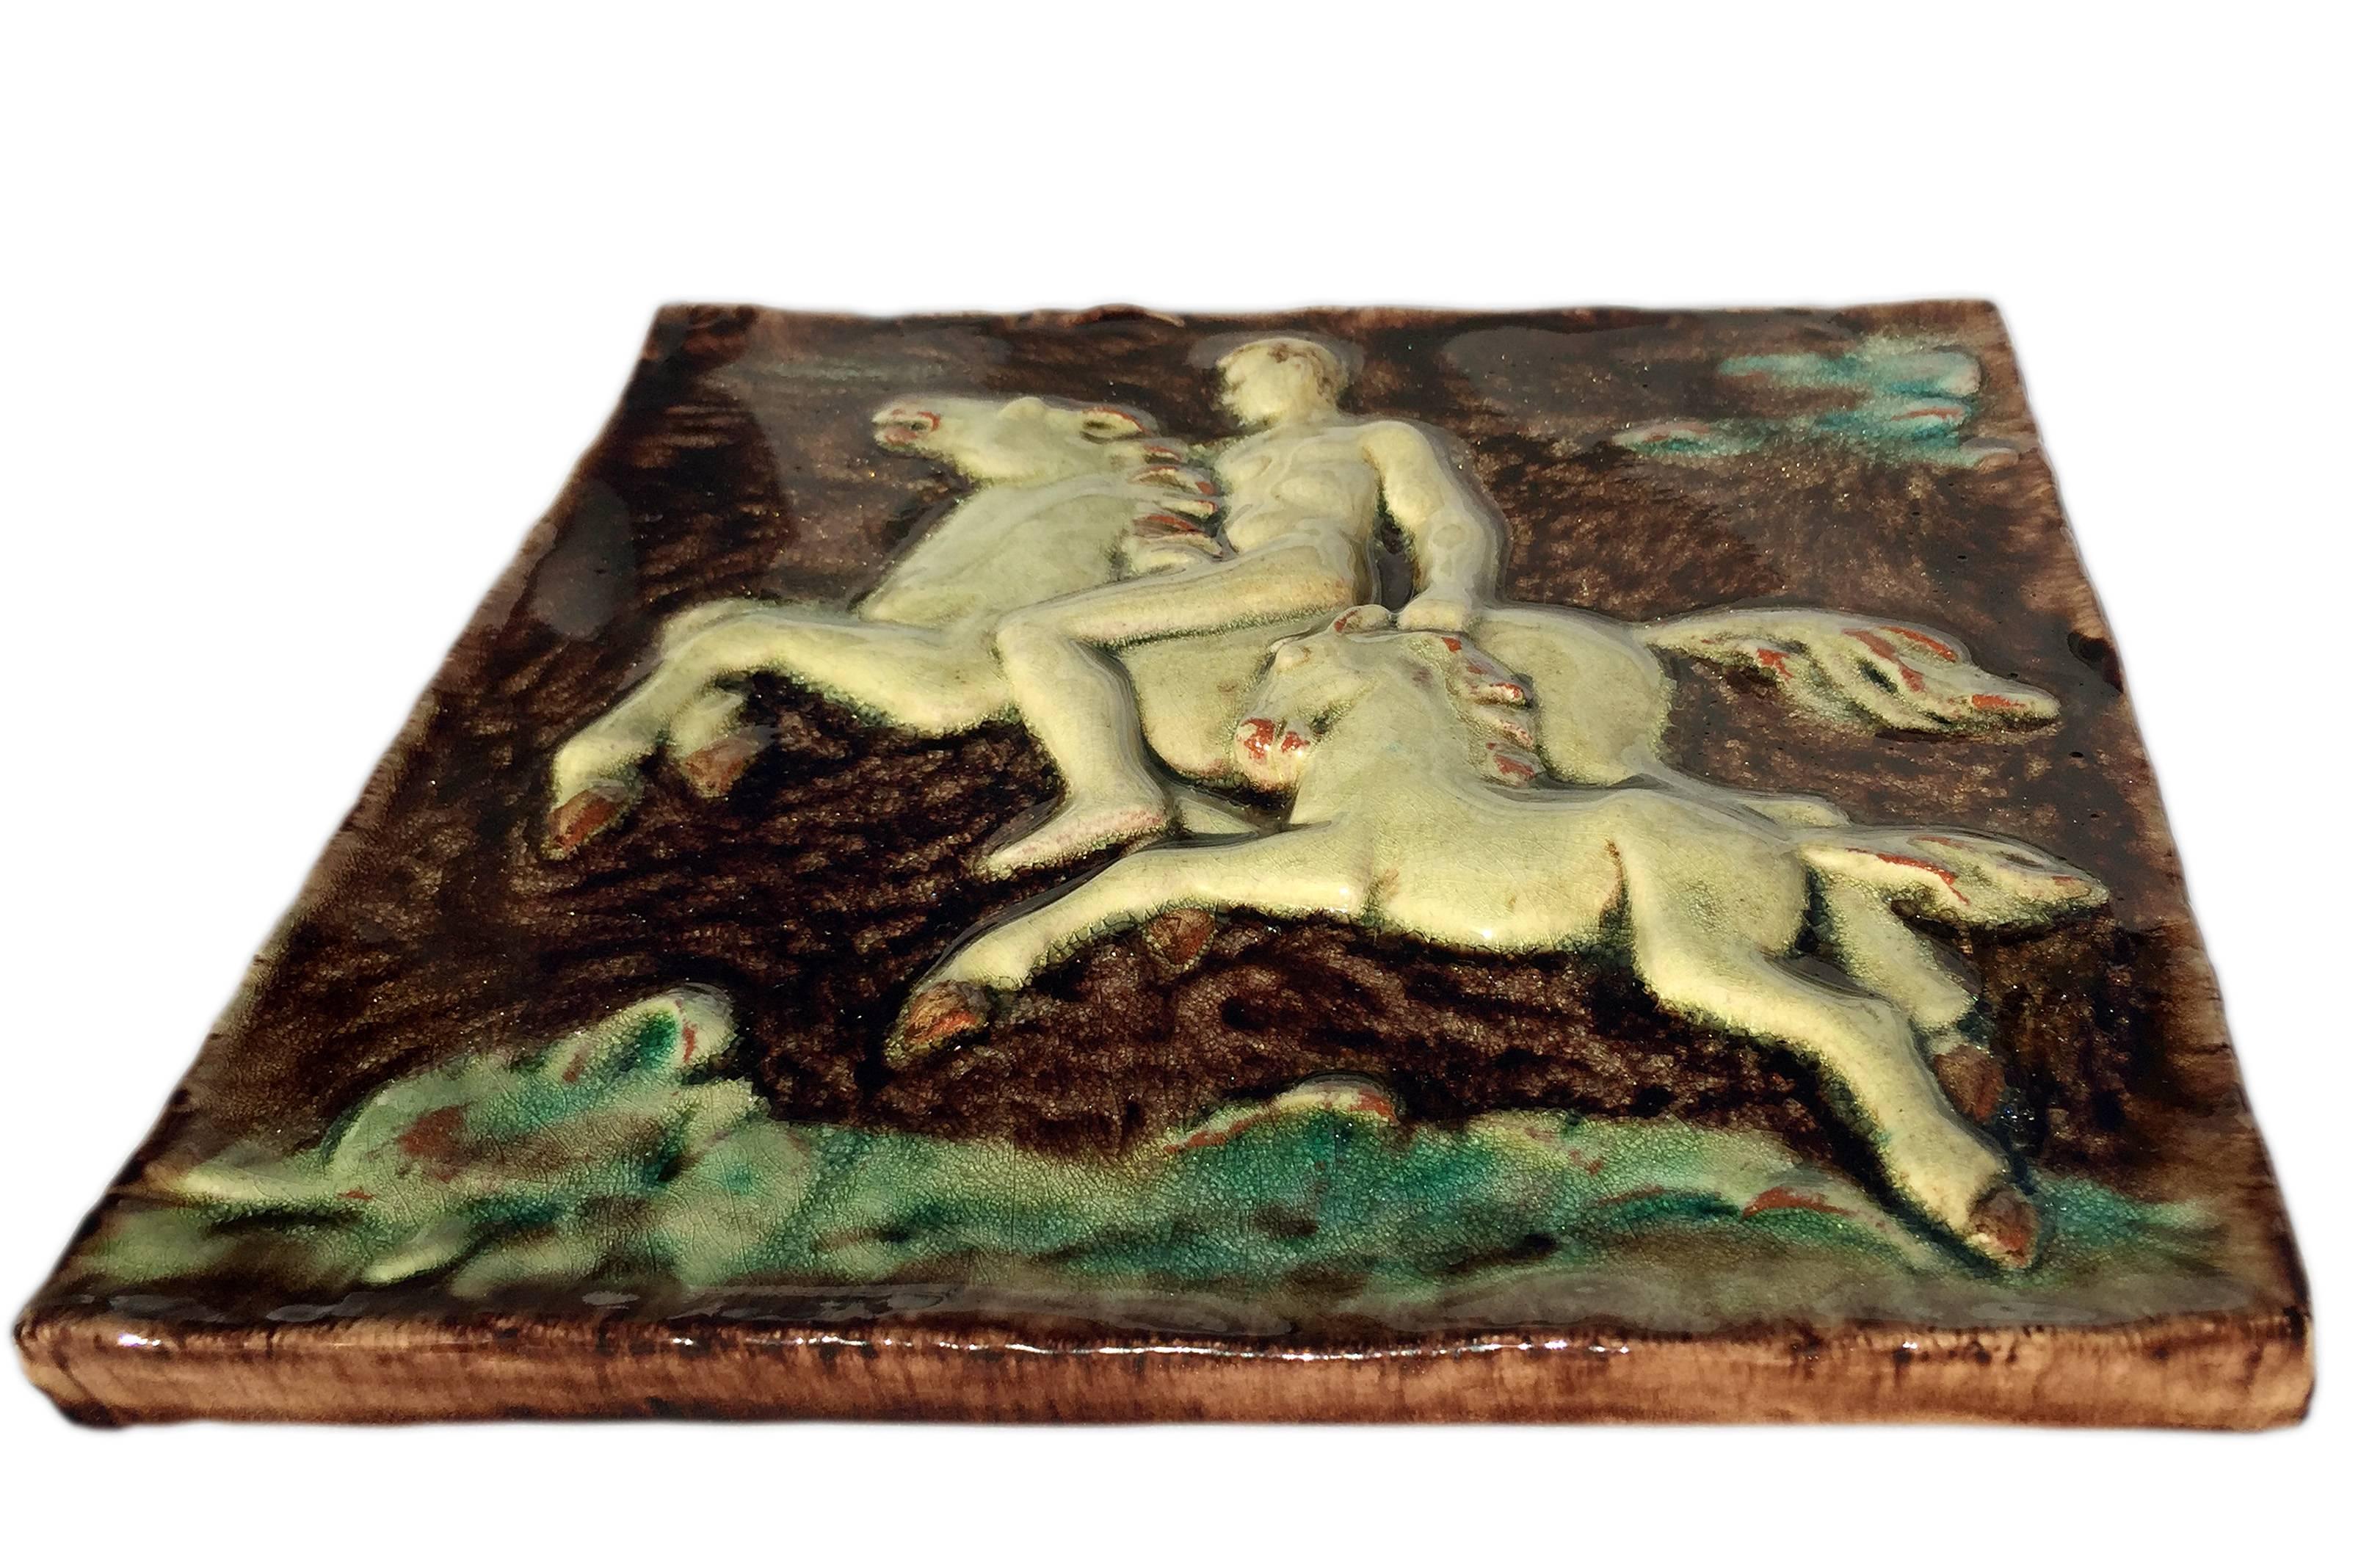 Rare and important wall tile panel relief depicting a nude rider, a horse and a foal in cream, terracotta, brown and green high glossy glaze by Hugo Ruf, 1937-1951.
Marked and signed on the backside Karlsruhe Majolica, serial number 4714.
The tile